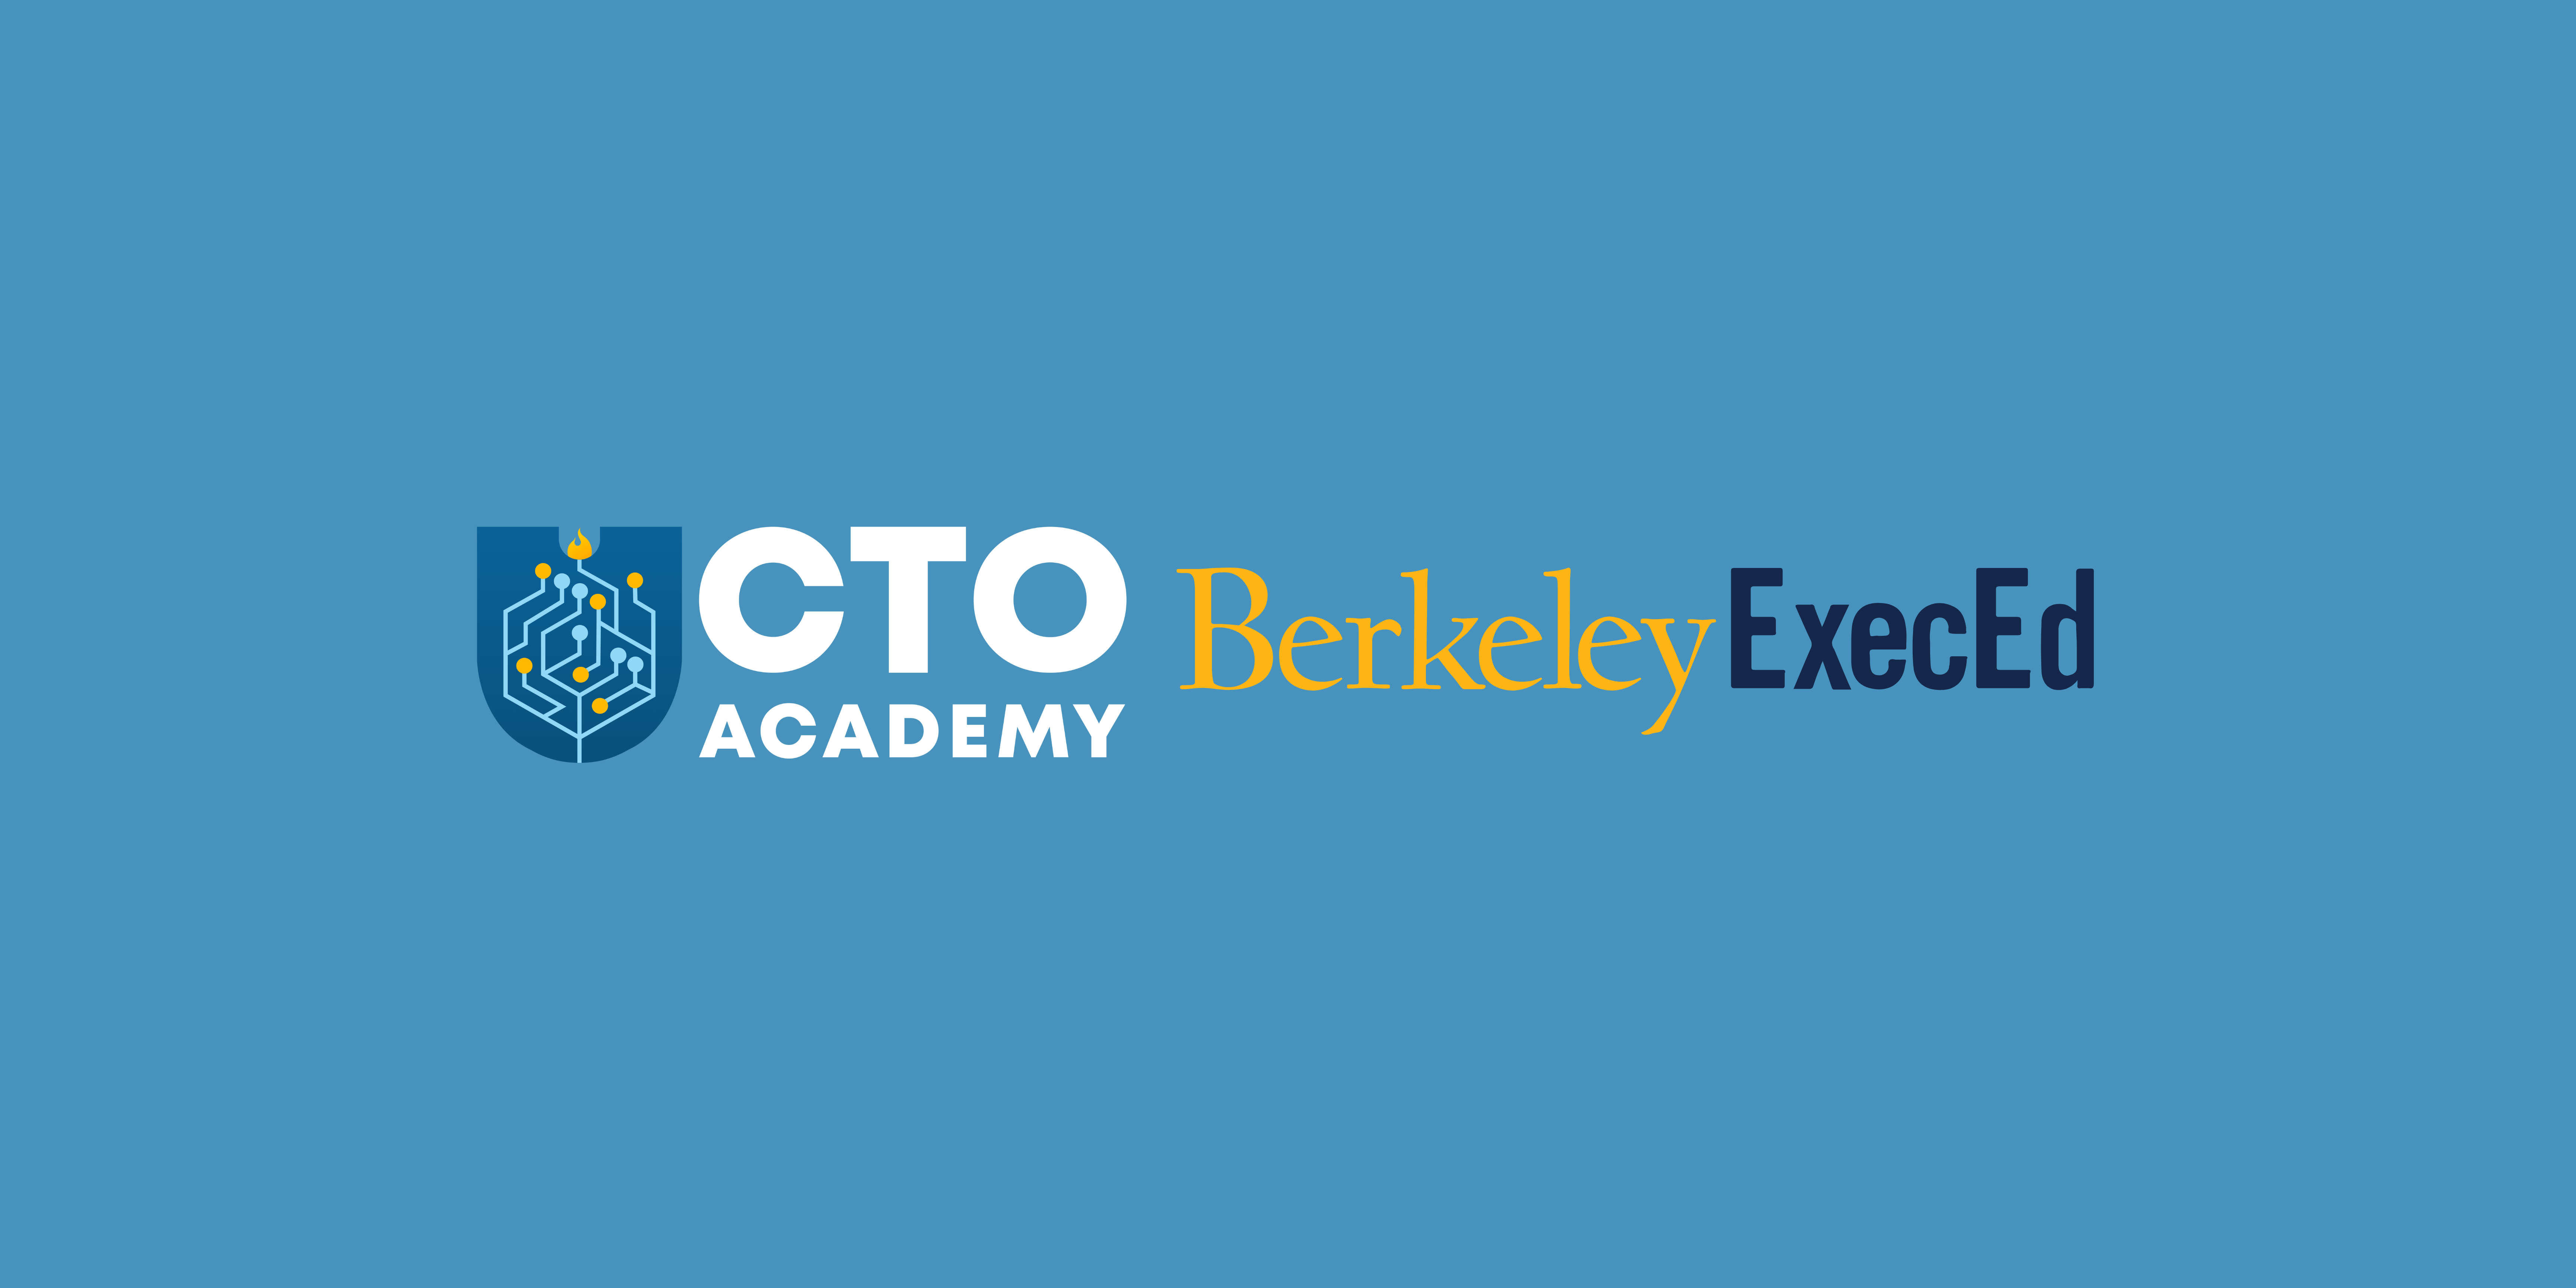 How Does CTO Academy Compare With The Berkeley CTO Program?